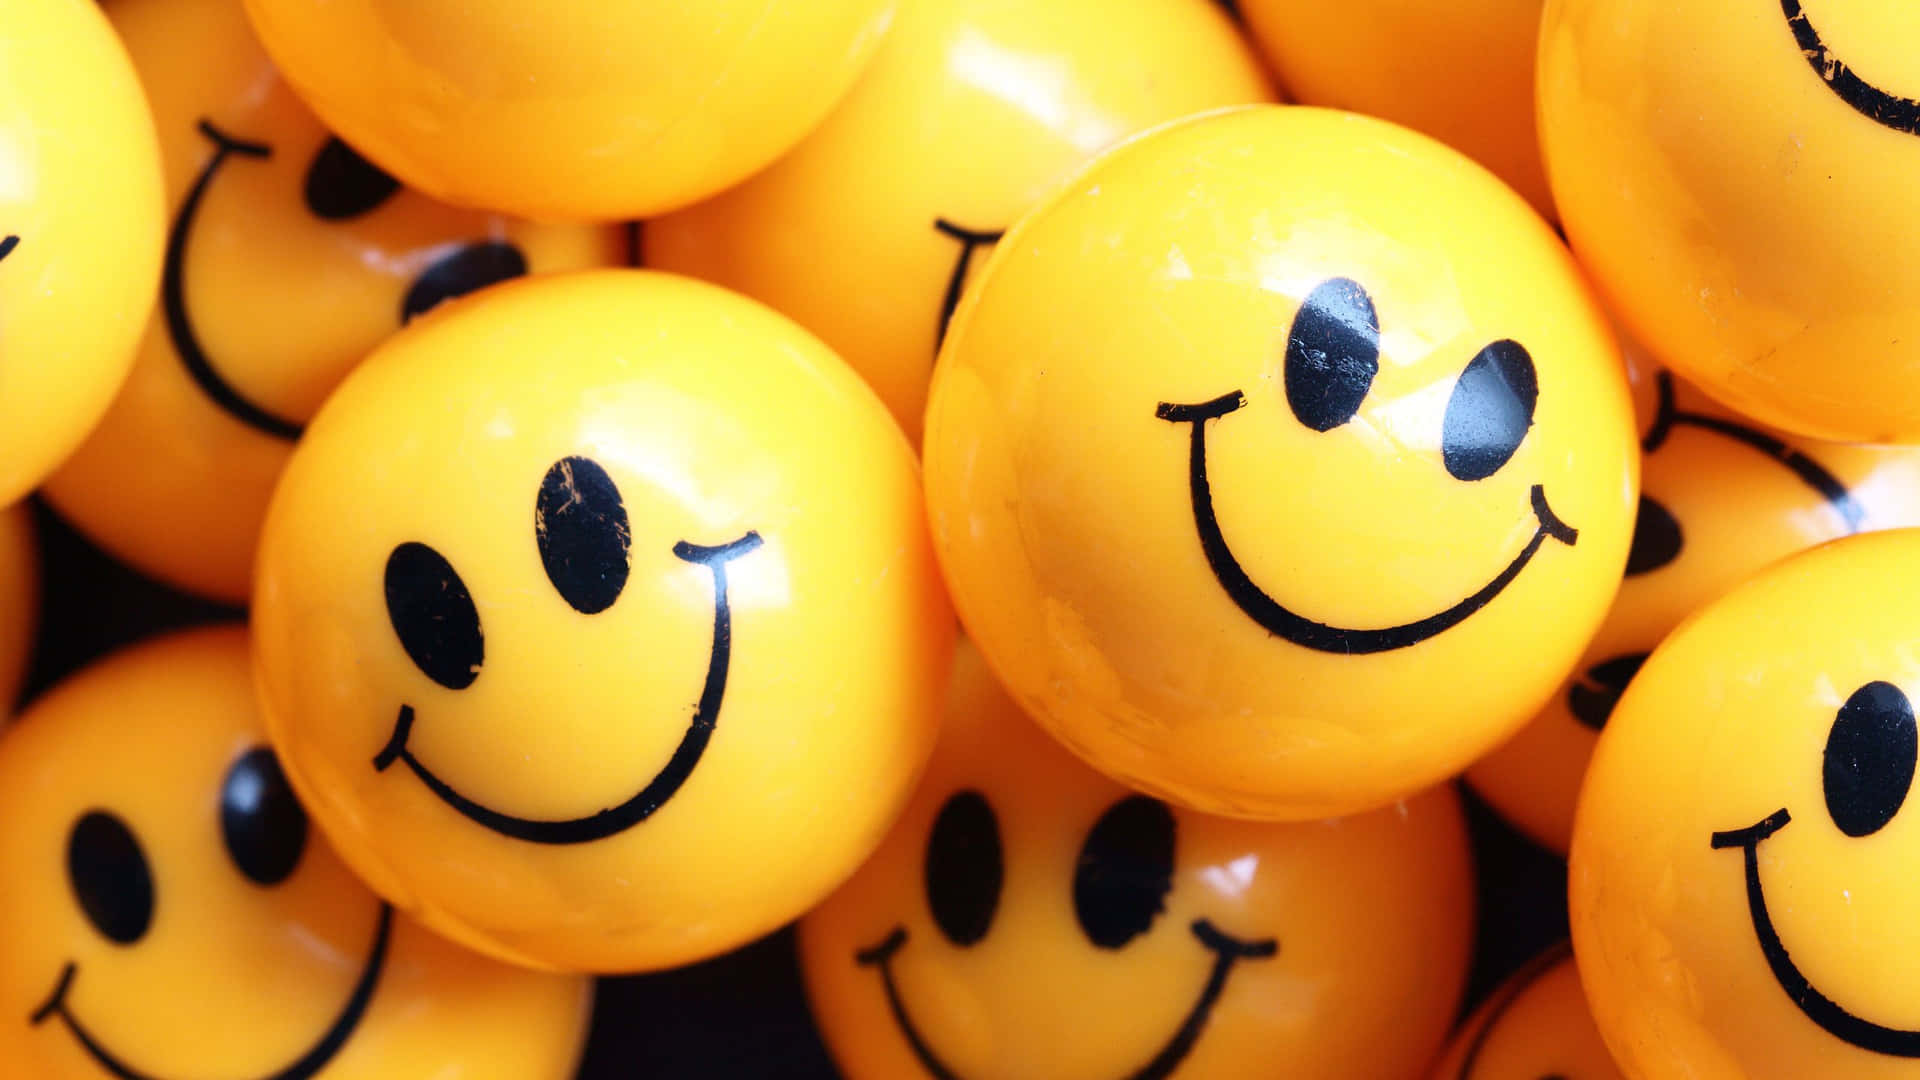 A Collection Of Cute Smile Emoji Balls Expressing Different Emotions.